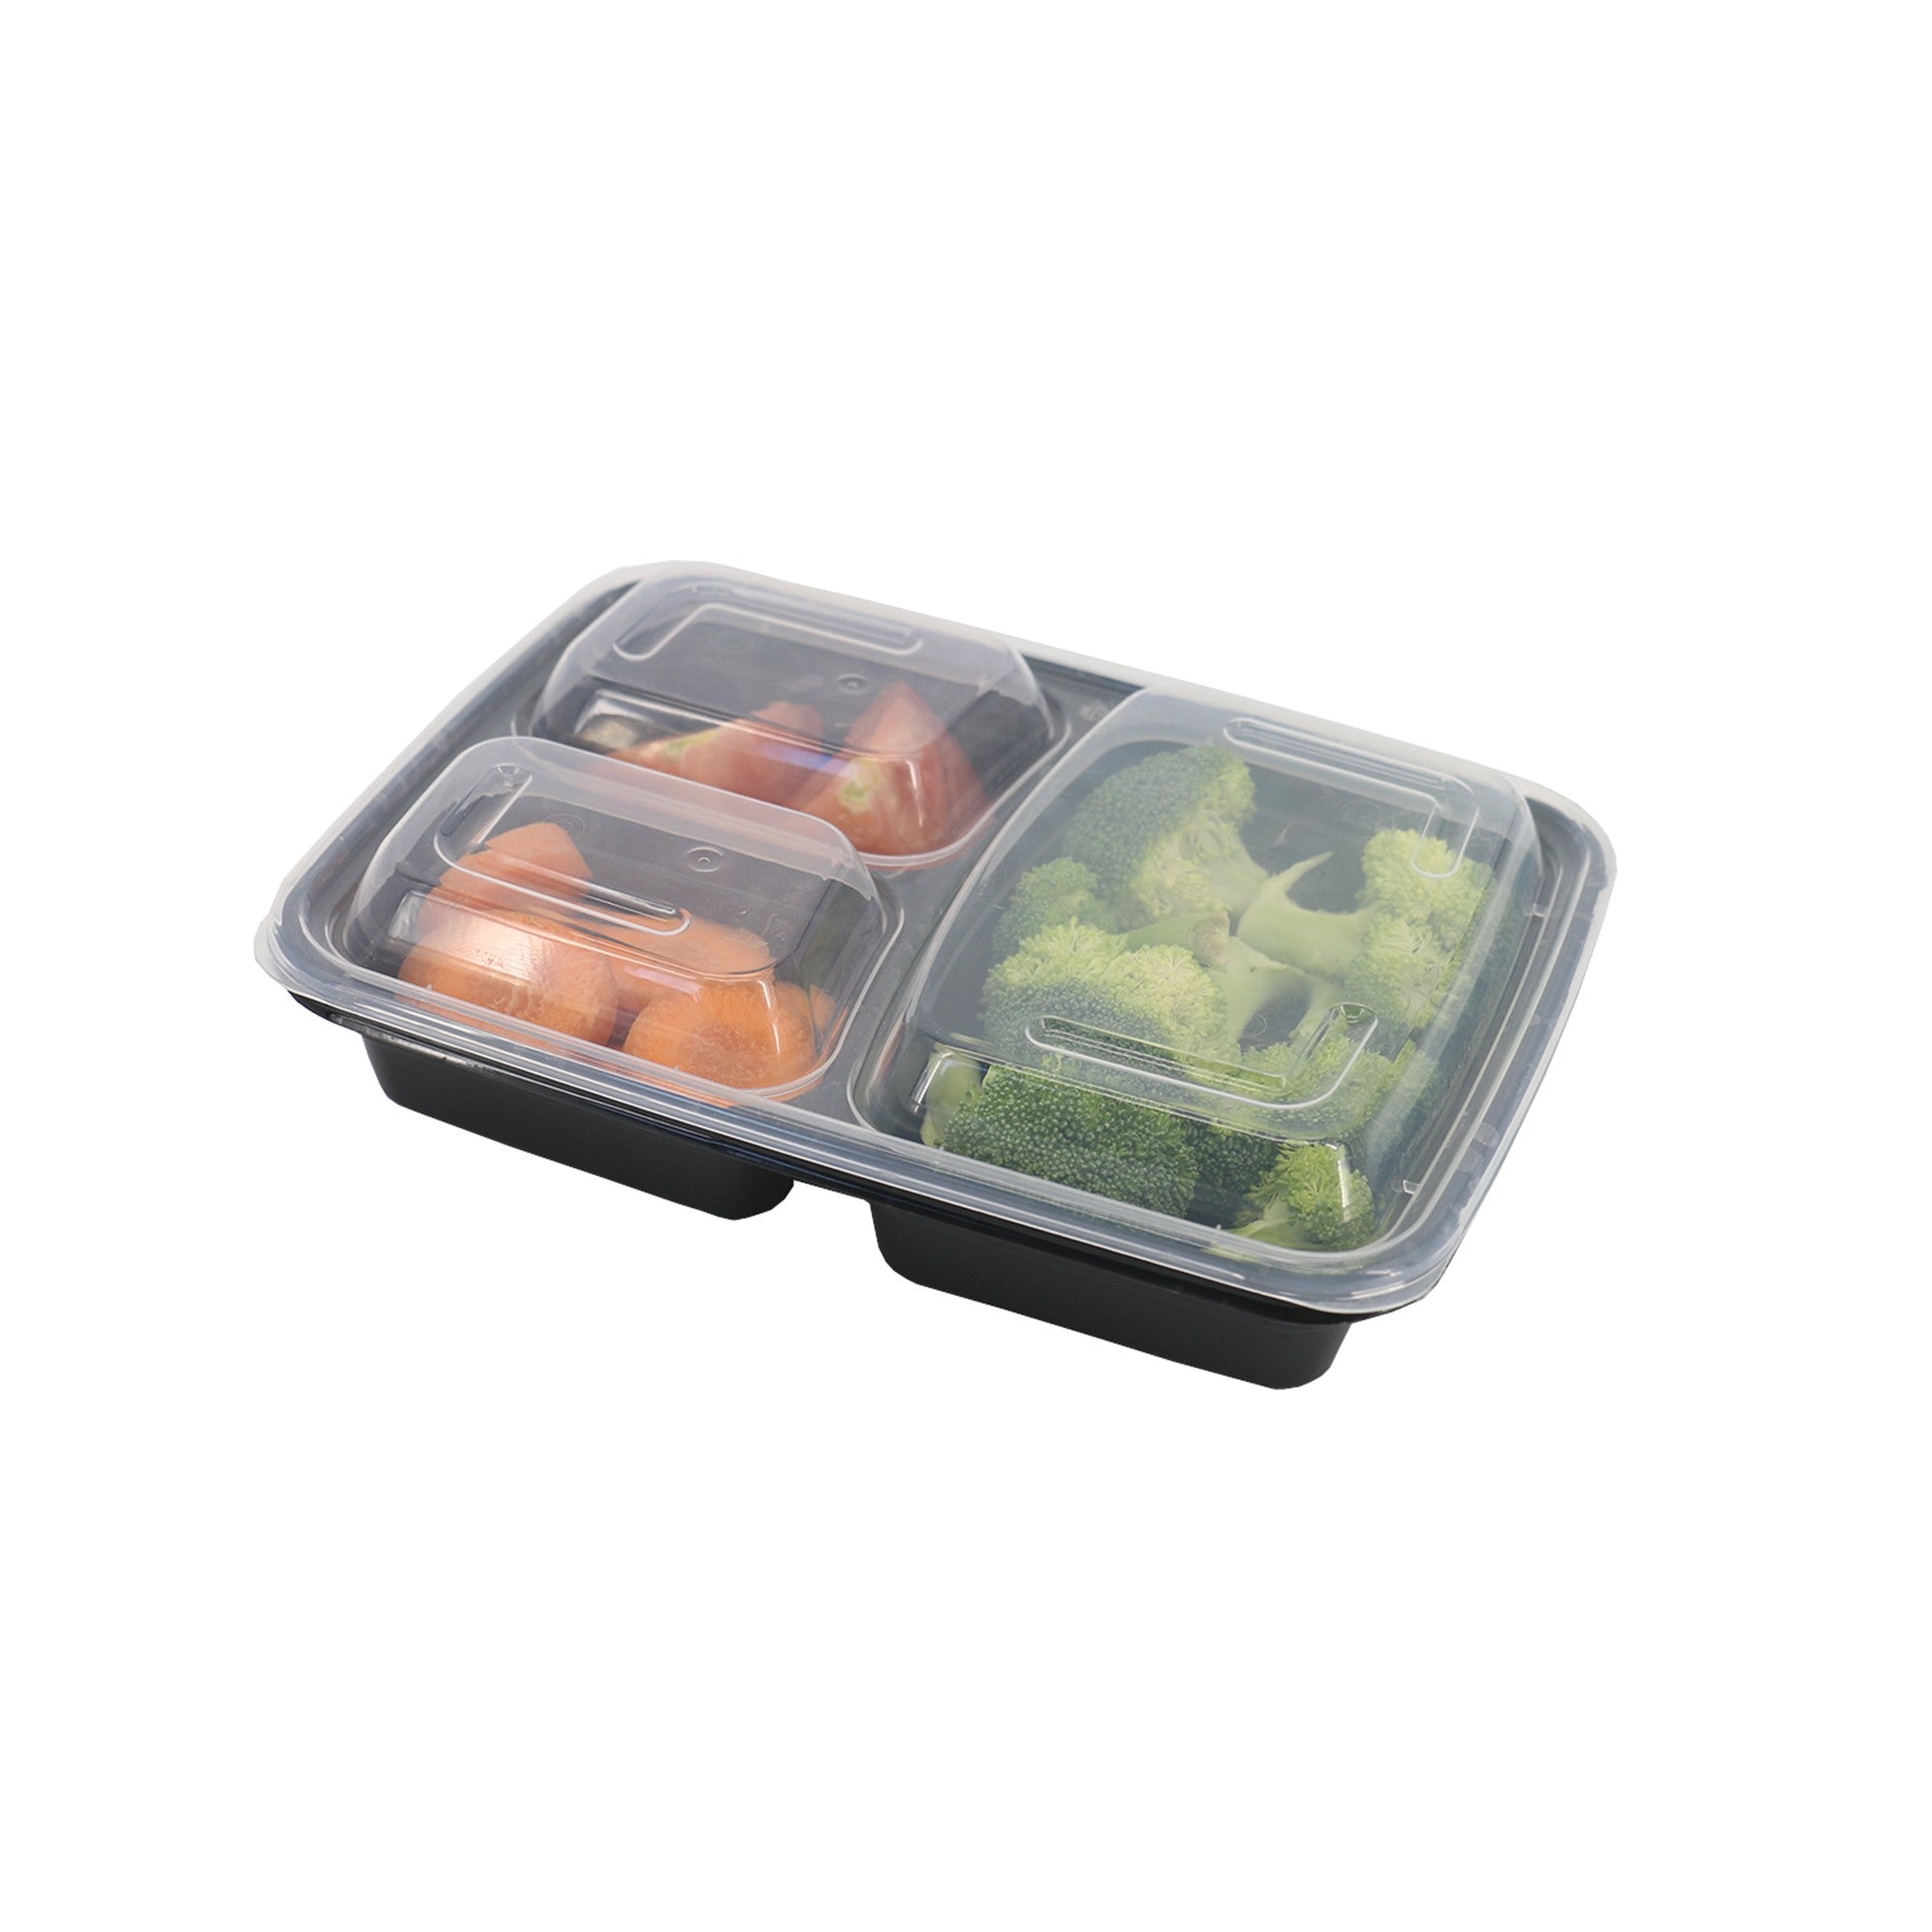 [50 Sets] 24 oz. Meal Prep Containers With Lids, 3 Compartment Lunch  Containers, Bento Boxes, Food Storage Containers